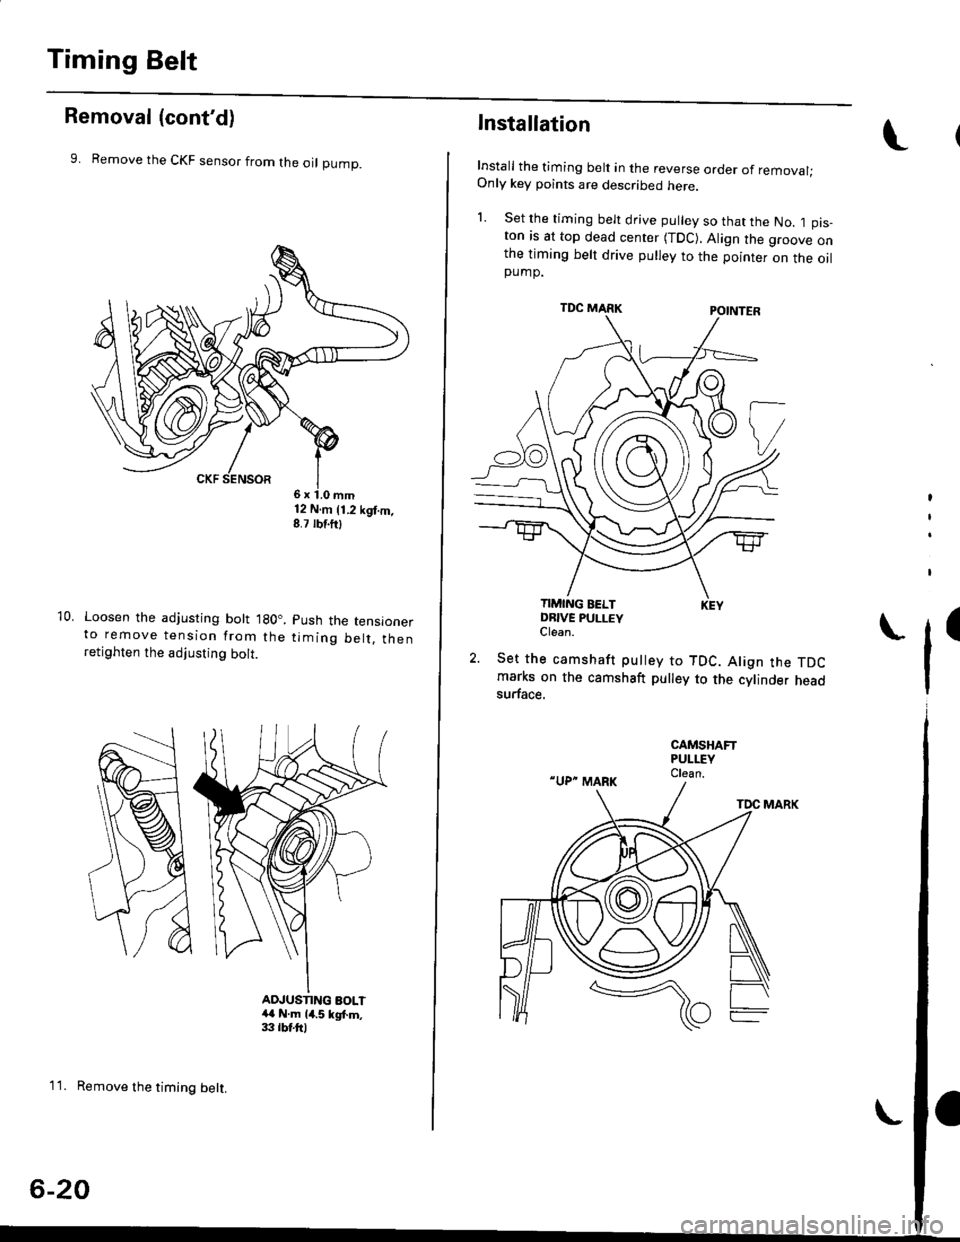 HONDA CIVIC 1999 6.G Workshop Manual Timing Belt
Removal (contd)
9. Remove the CKF sensor from the oI pump.
10. Loosen the adjusting bott lgO..to remove tension from theretighten the adjusting bolt.
12 N.m 11.2 kgt.m,8.7 rbf.ftl
Push th